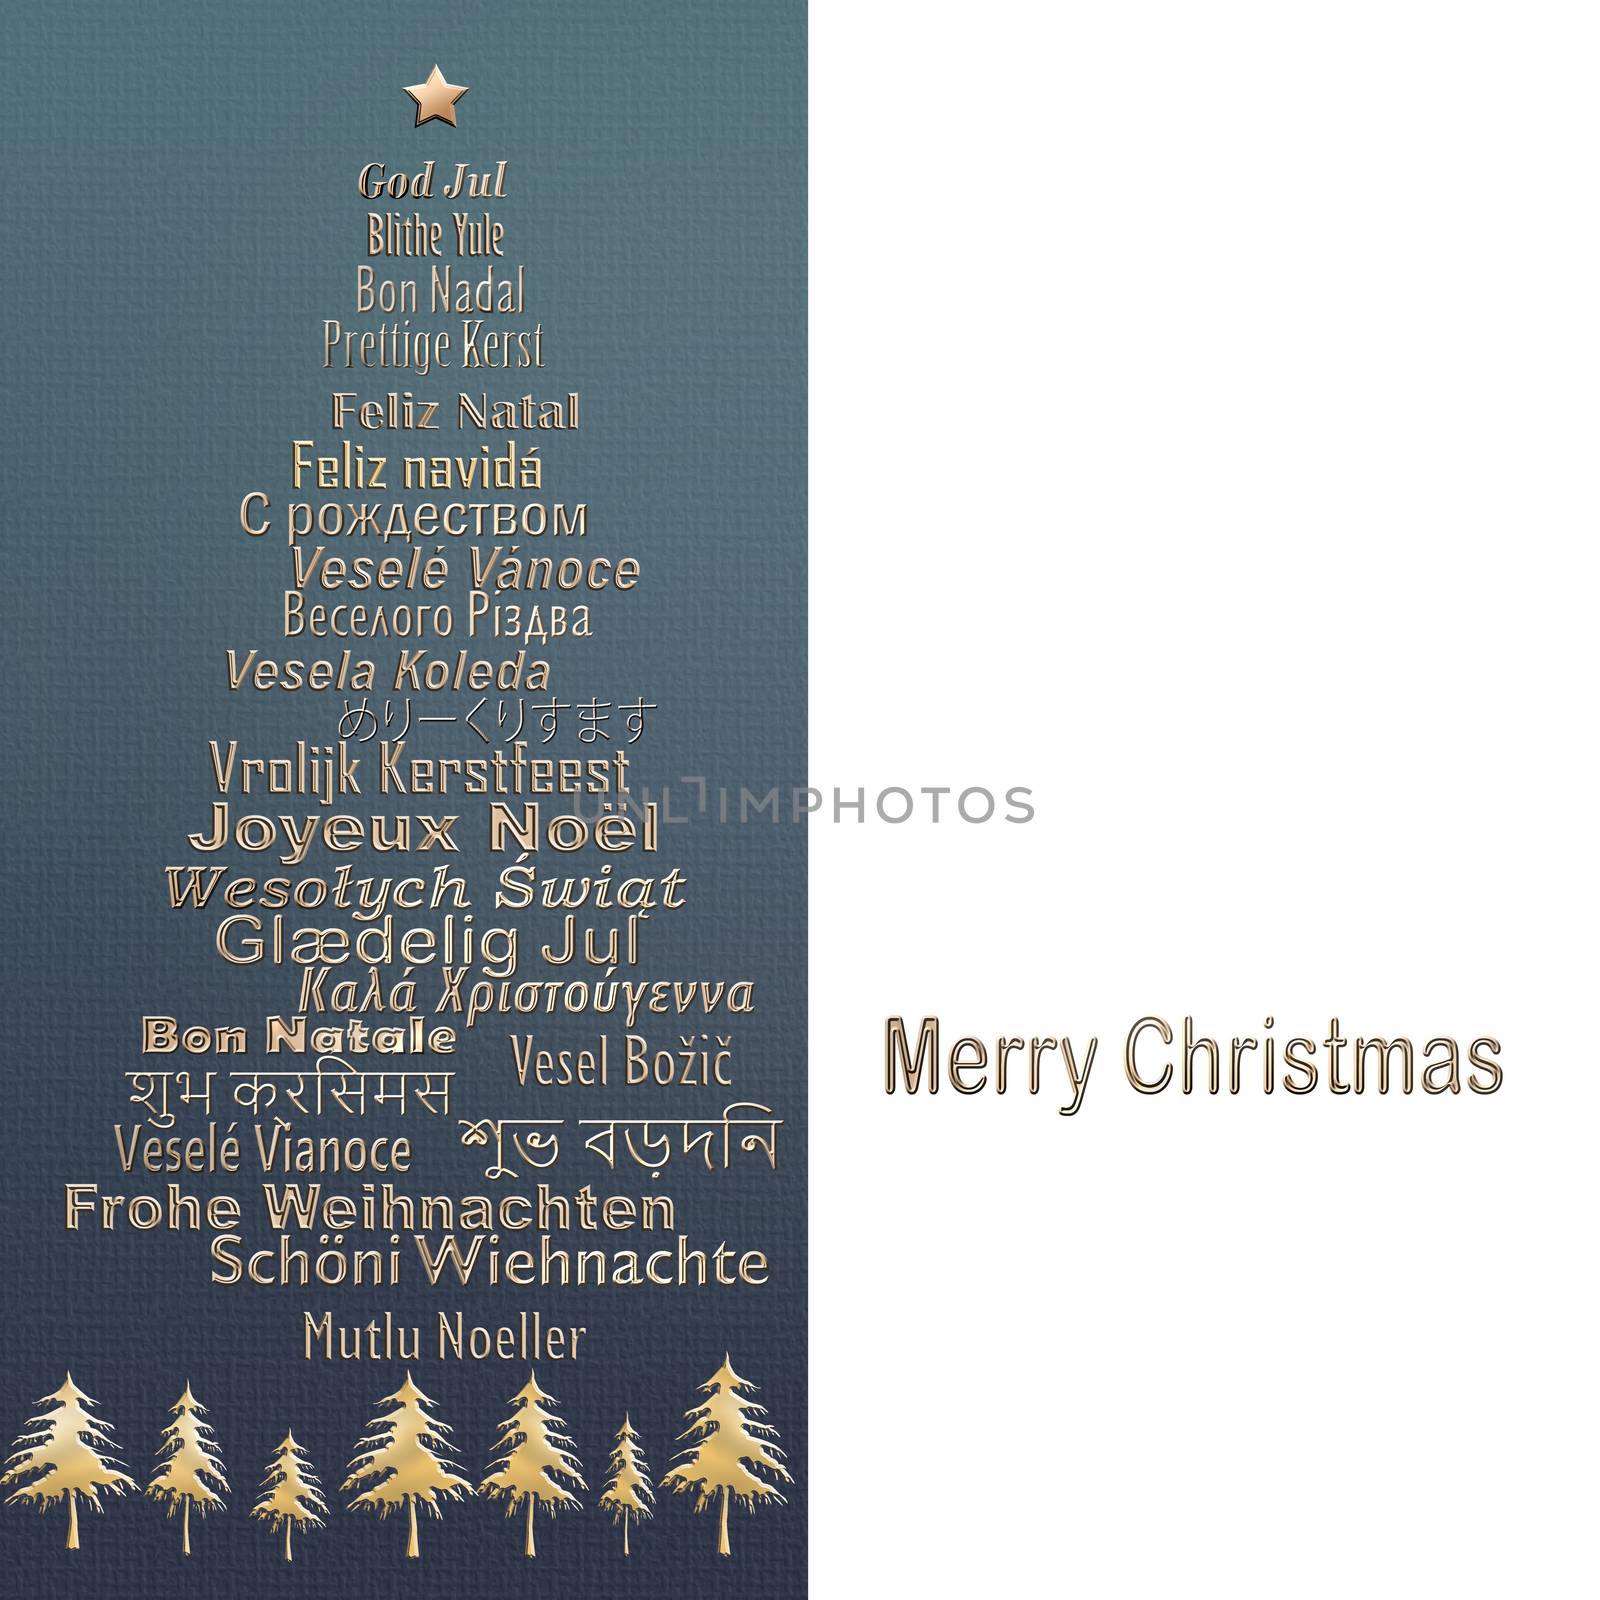 Merry Christmas card in Different Languages by NelliPolk